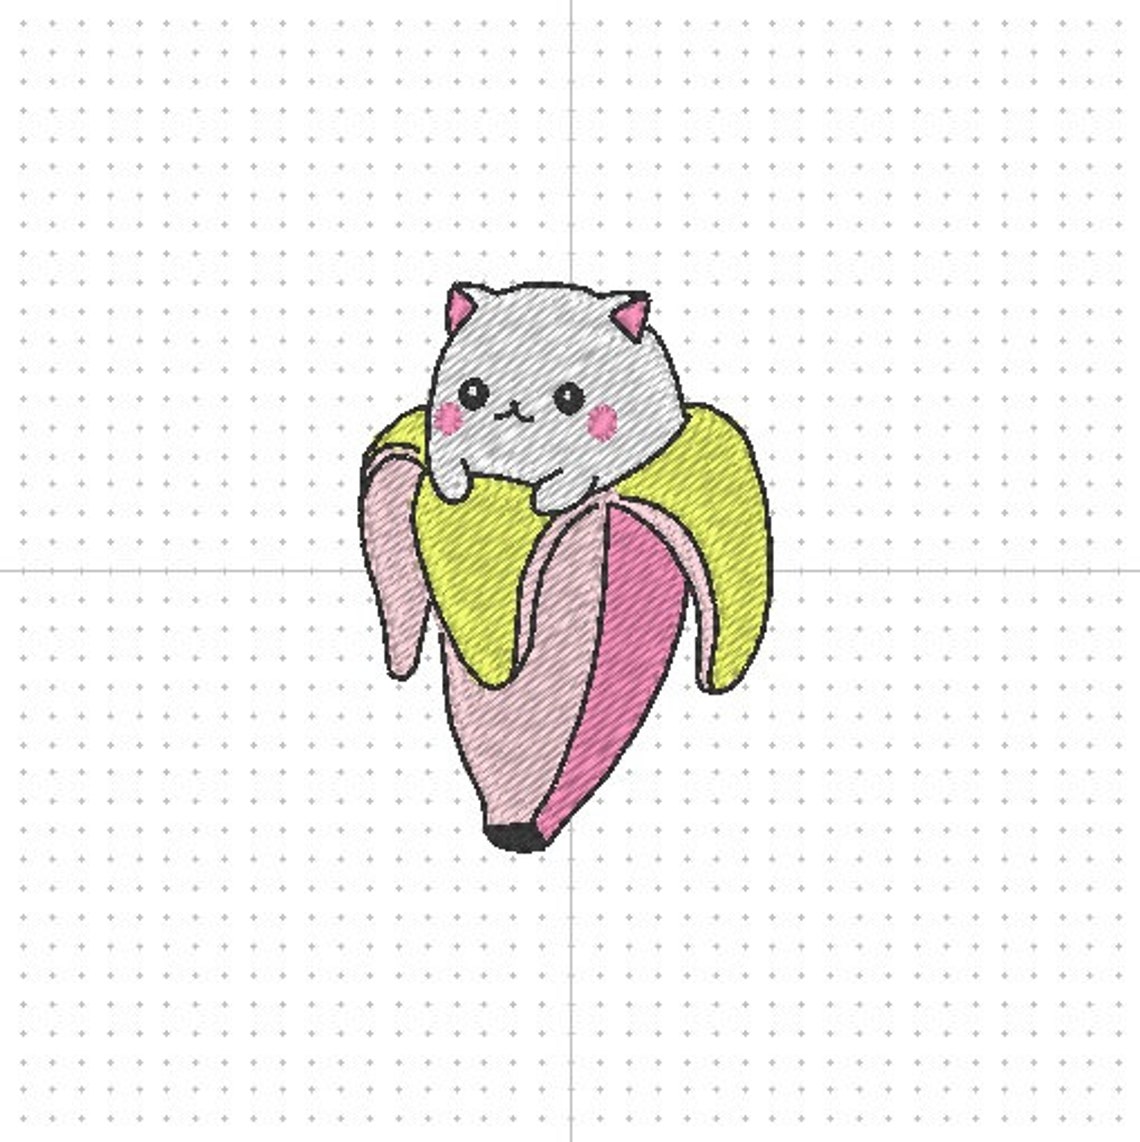 Bananya Patch Anime ITH 4x4 Machine Embroidery Design | Etsy